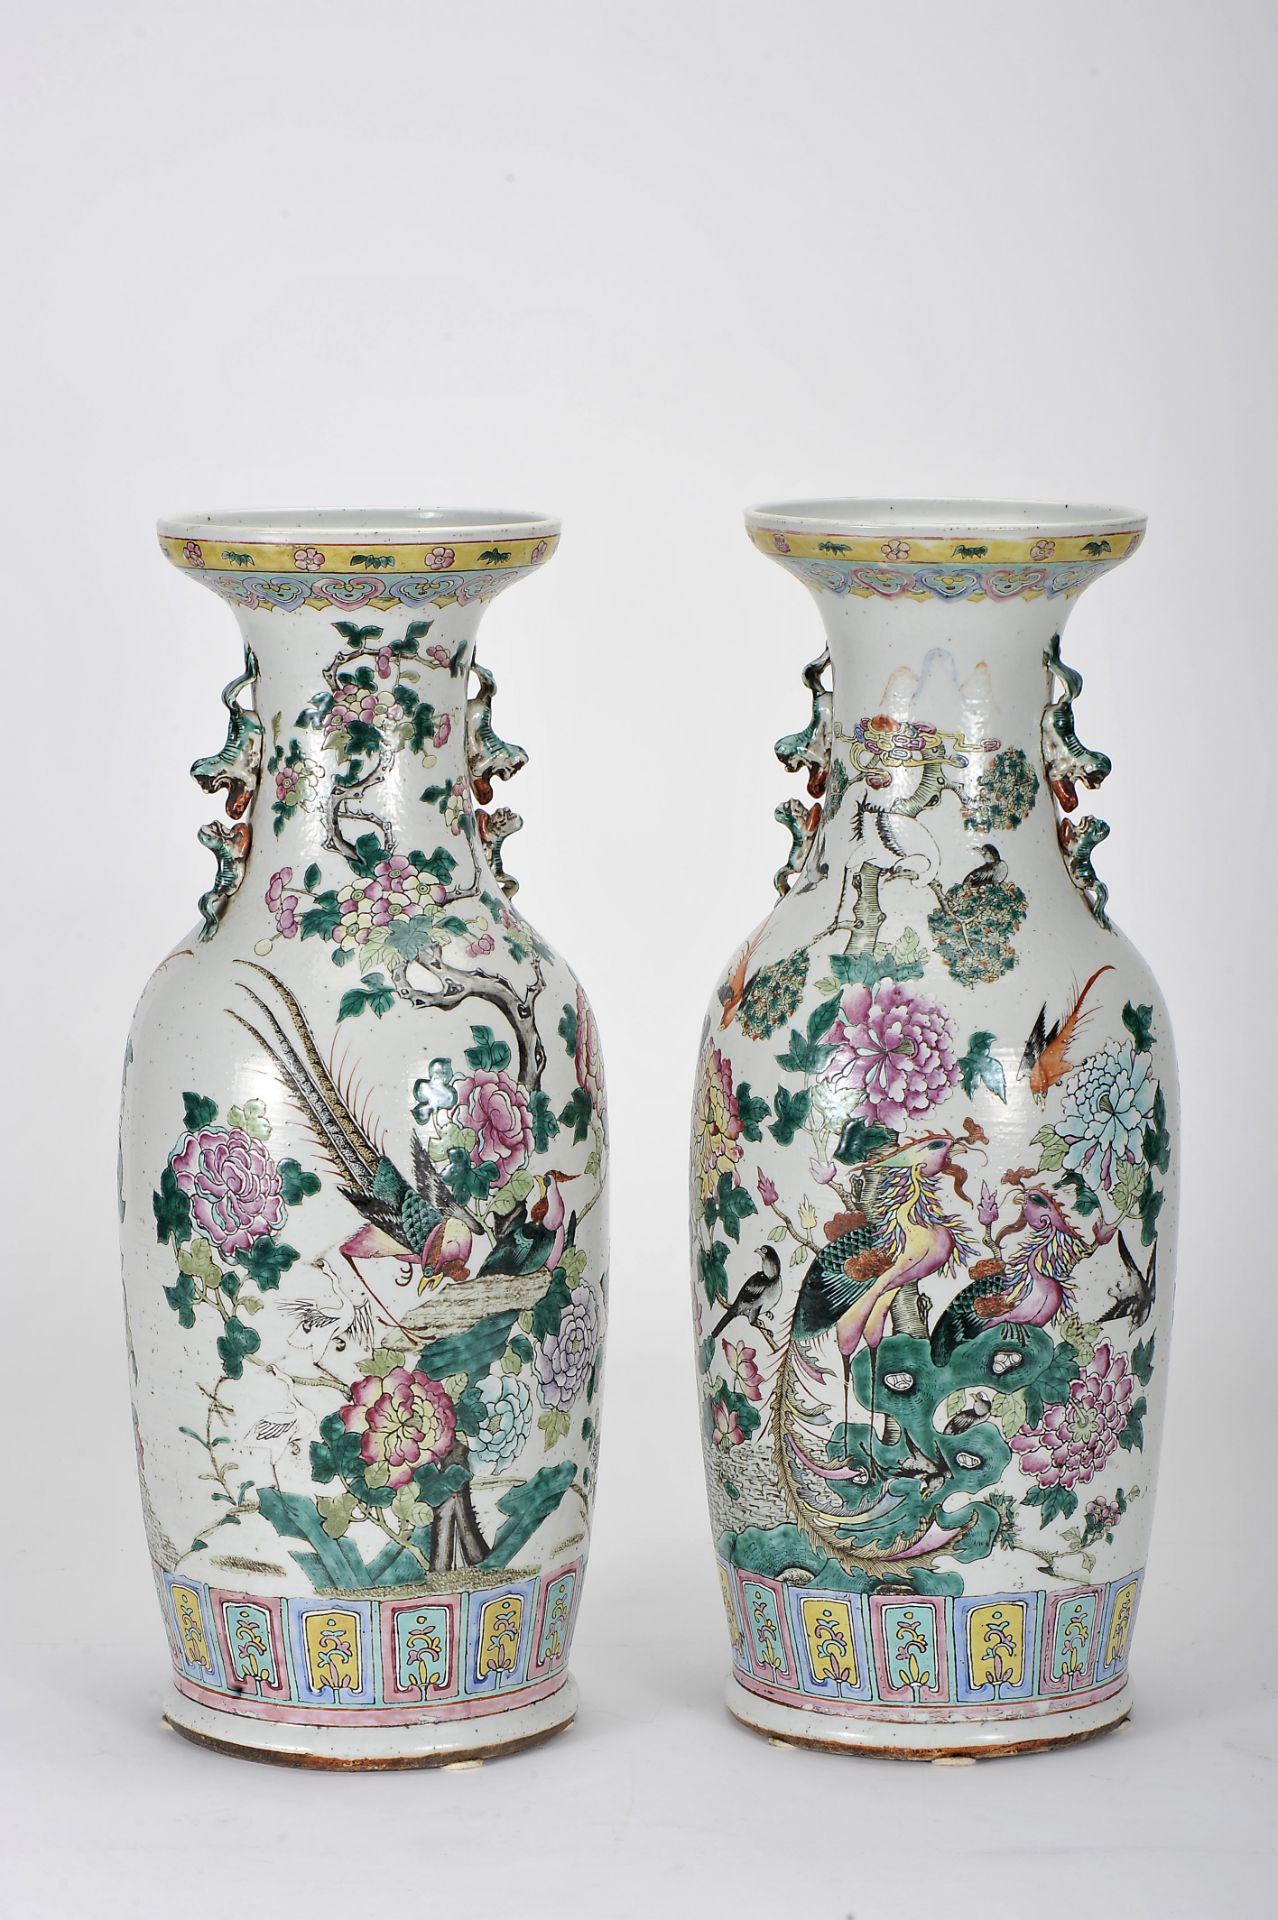 A Pair of Large Vases - Image 2 of 2